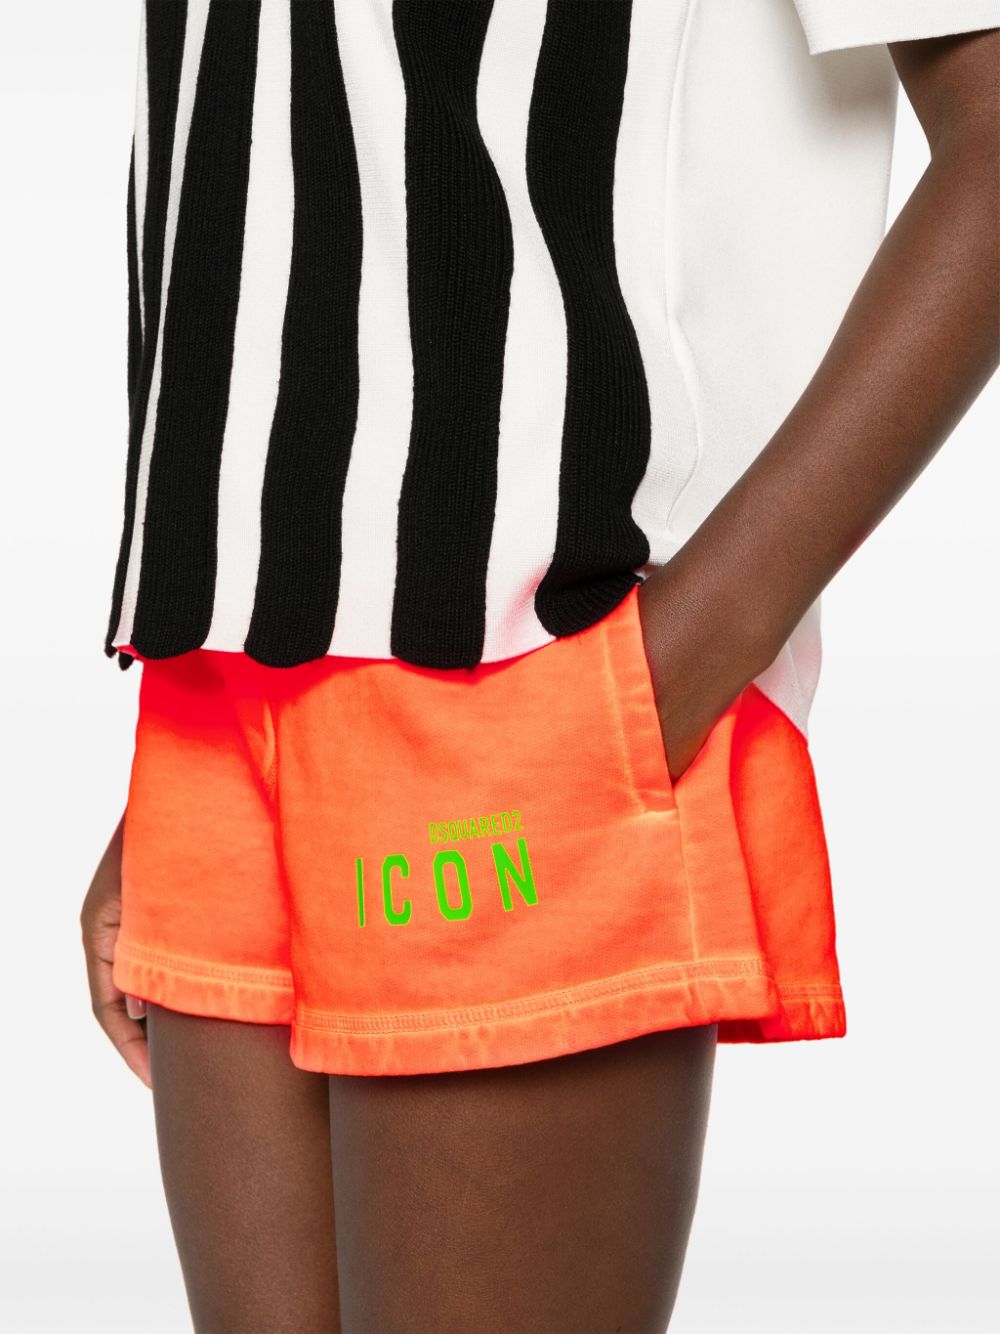 Be Icon cotton shorts<BR/><BR/>